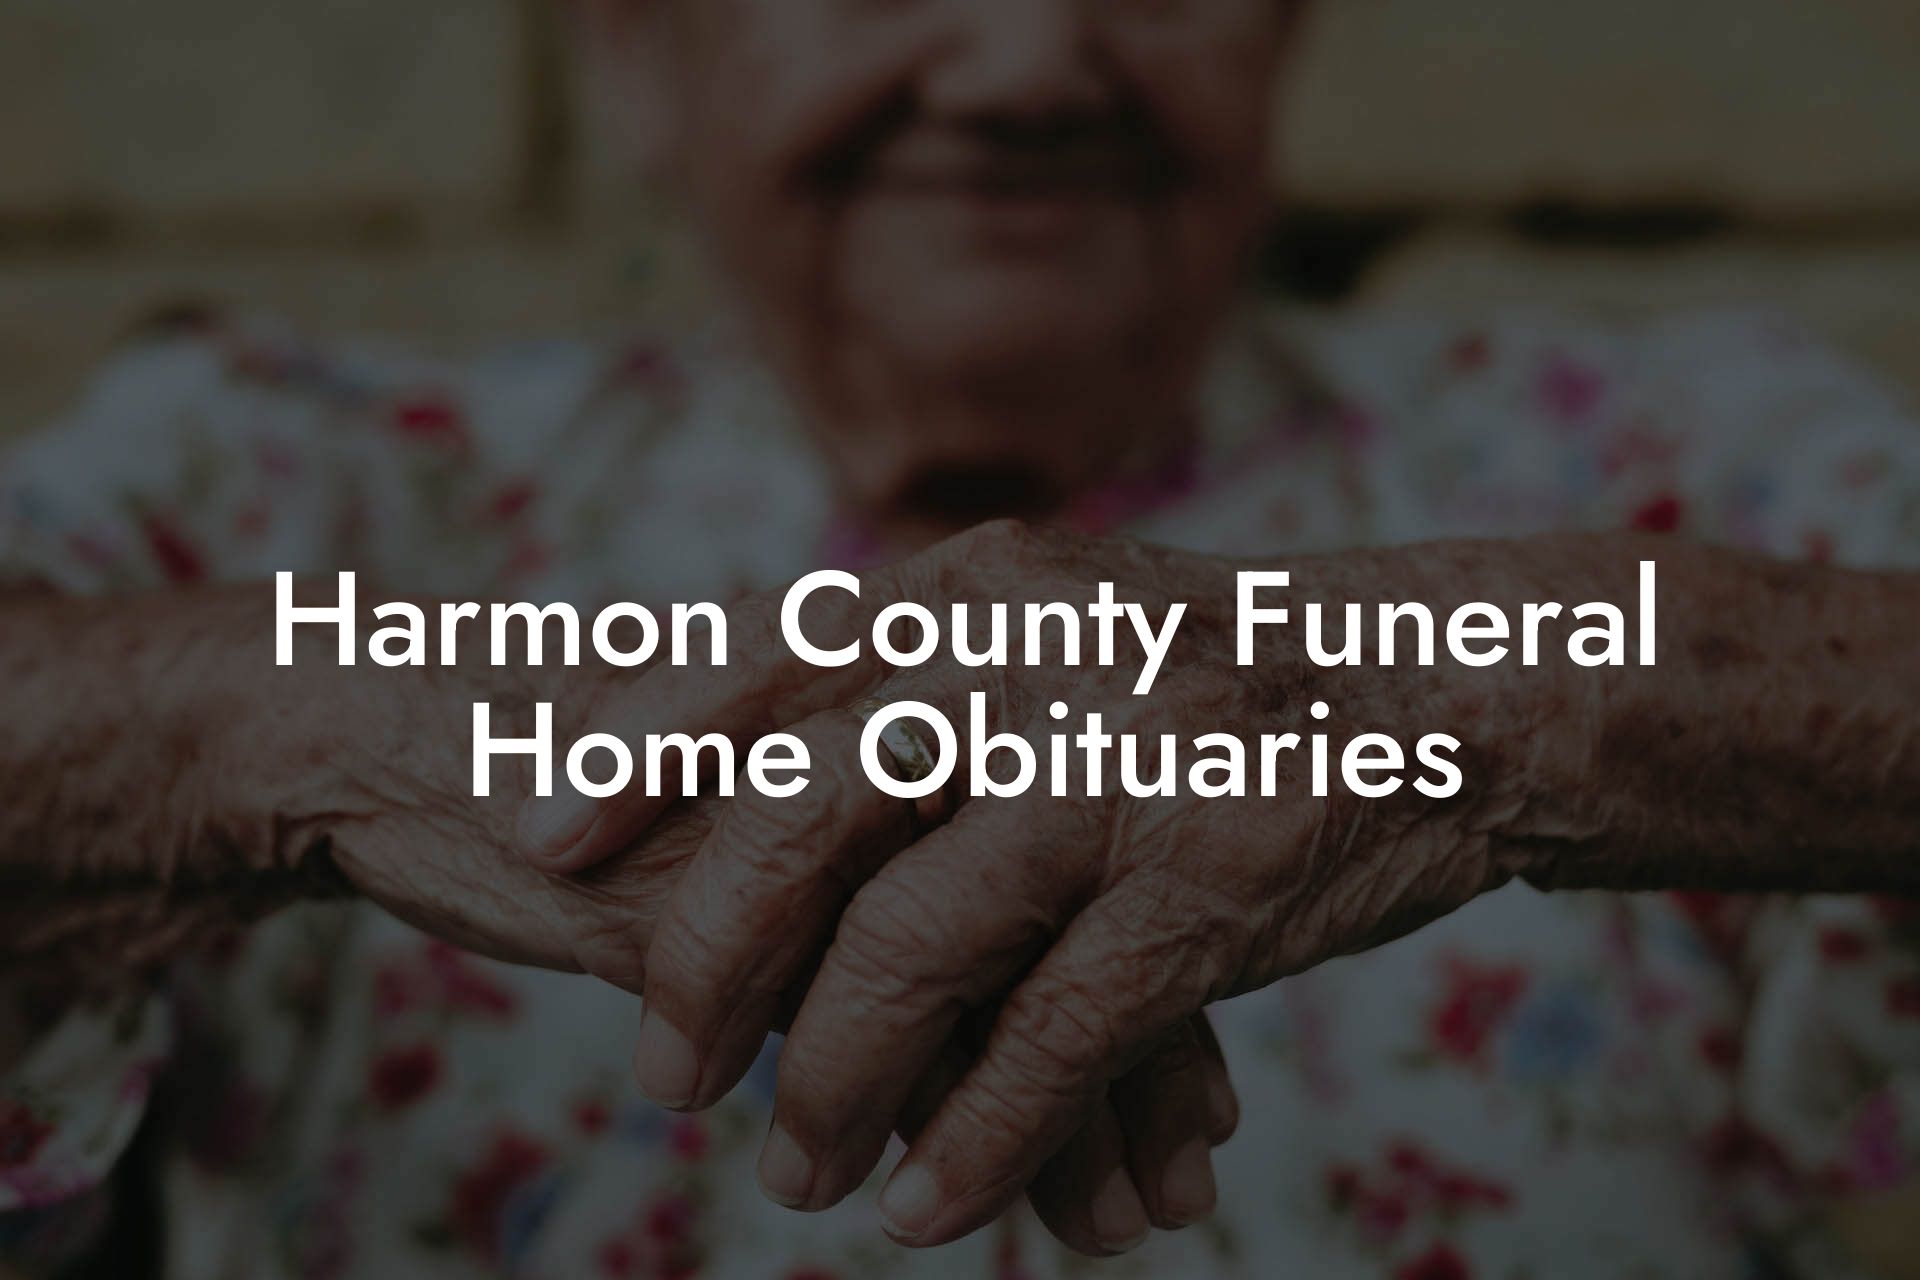 Harmon County Funeral Home Obituaries